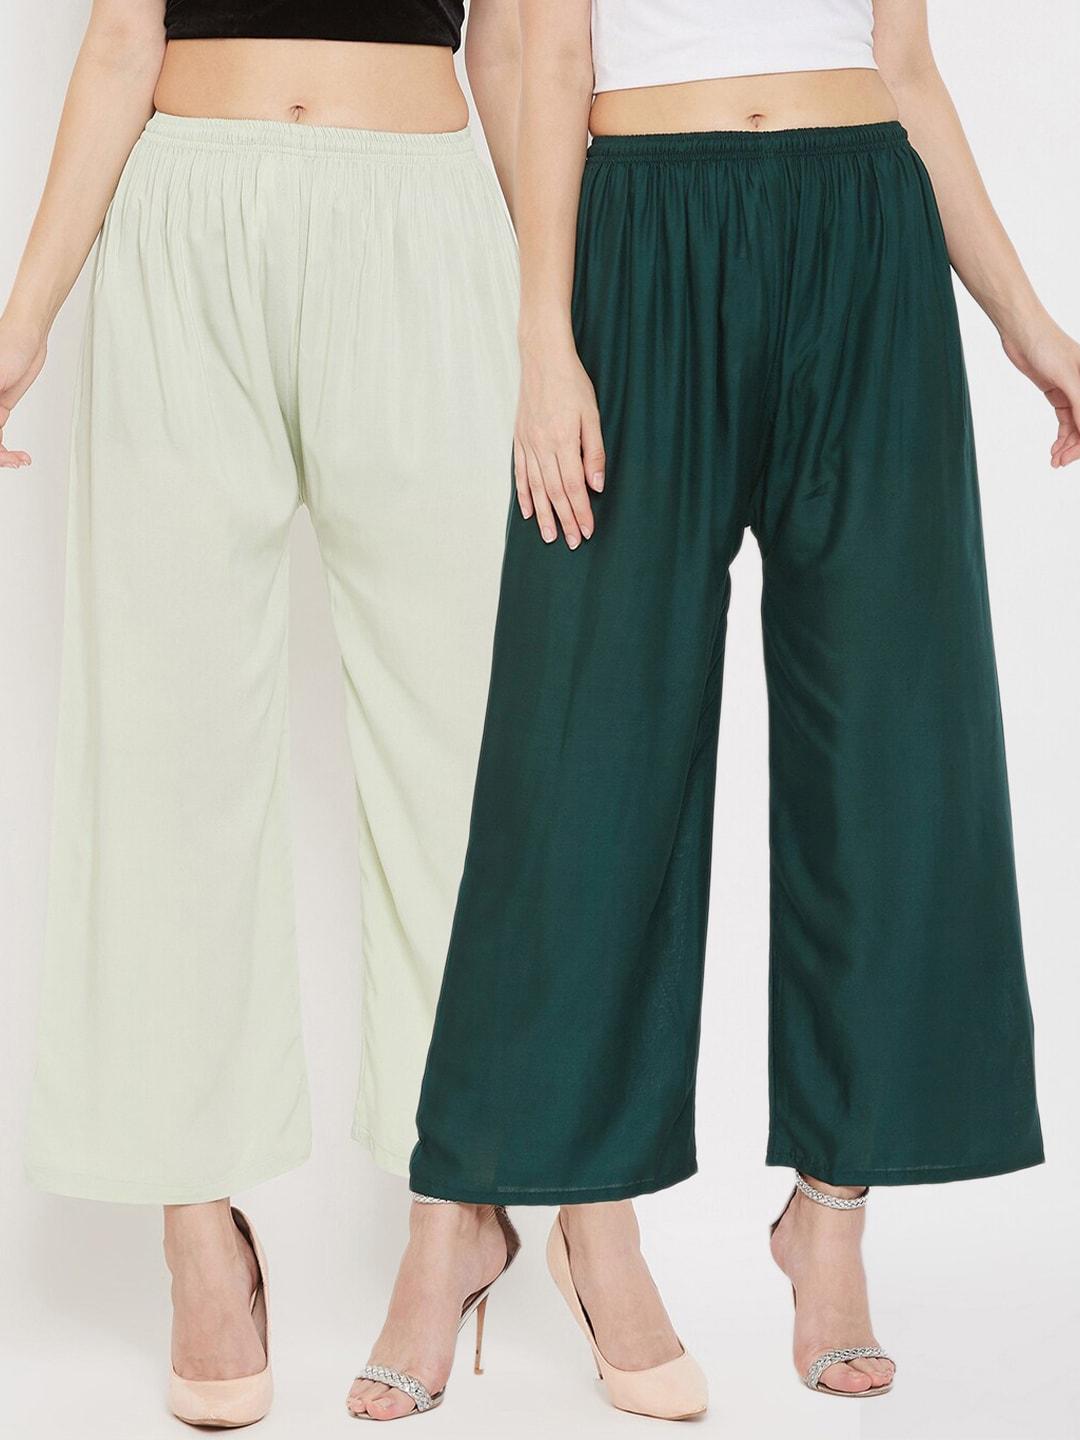 clora creation women pack of 2 green & off white knitted ethnic palazzos